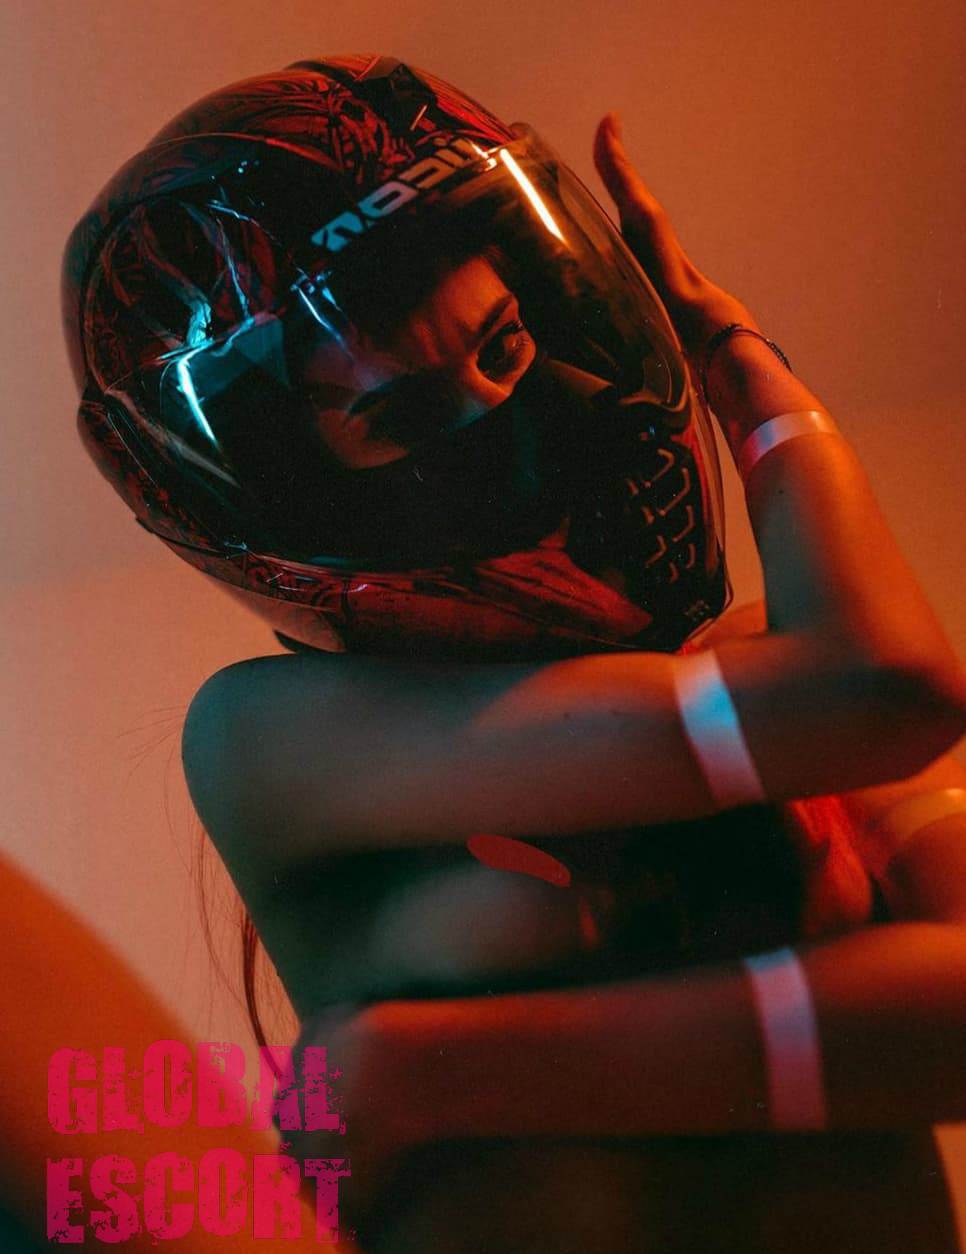 nude sexy escort model Christina at a photo shoot in a helmet